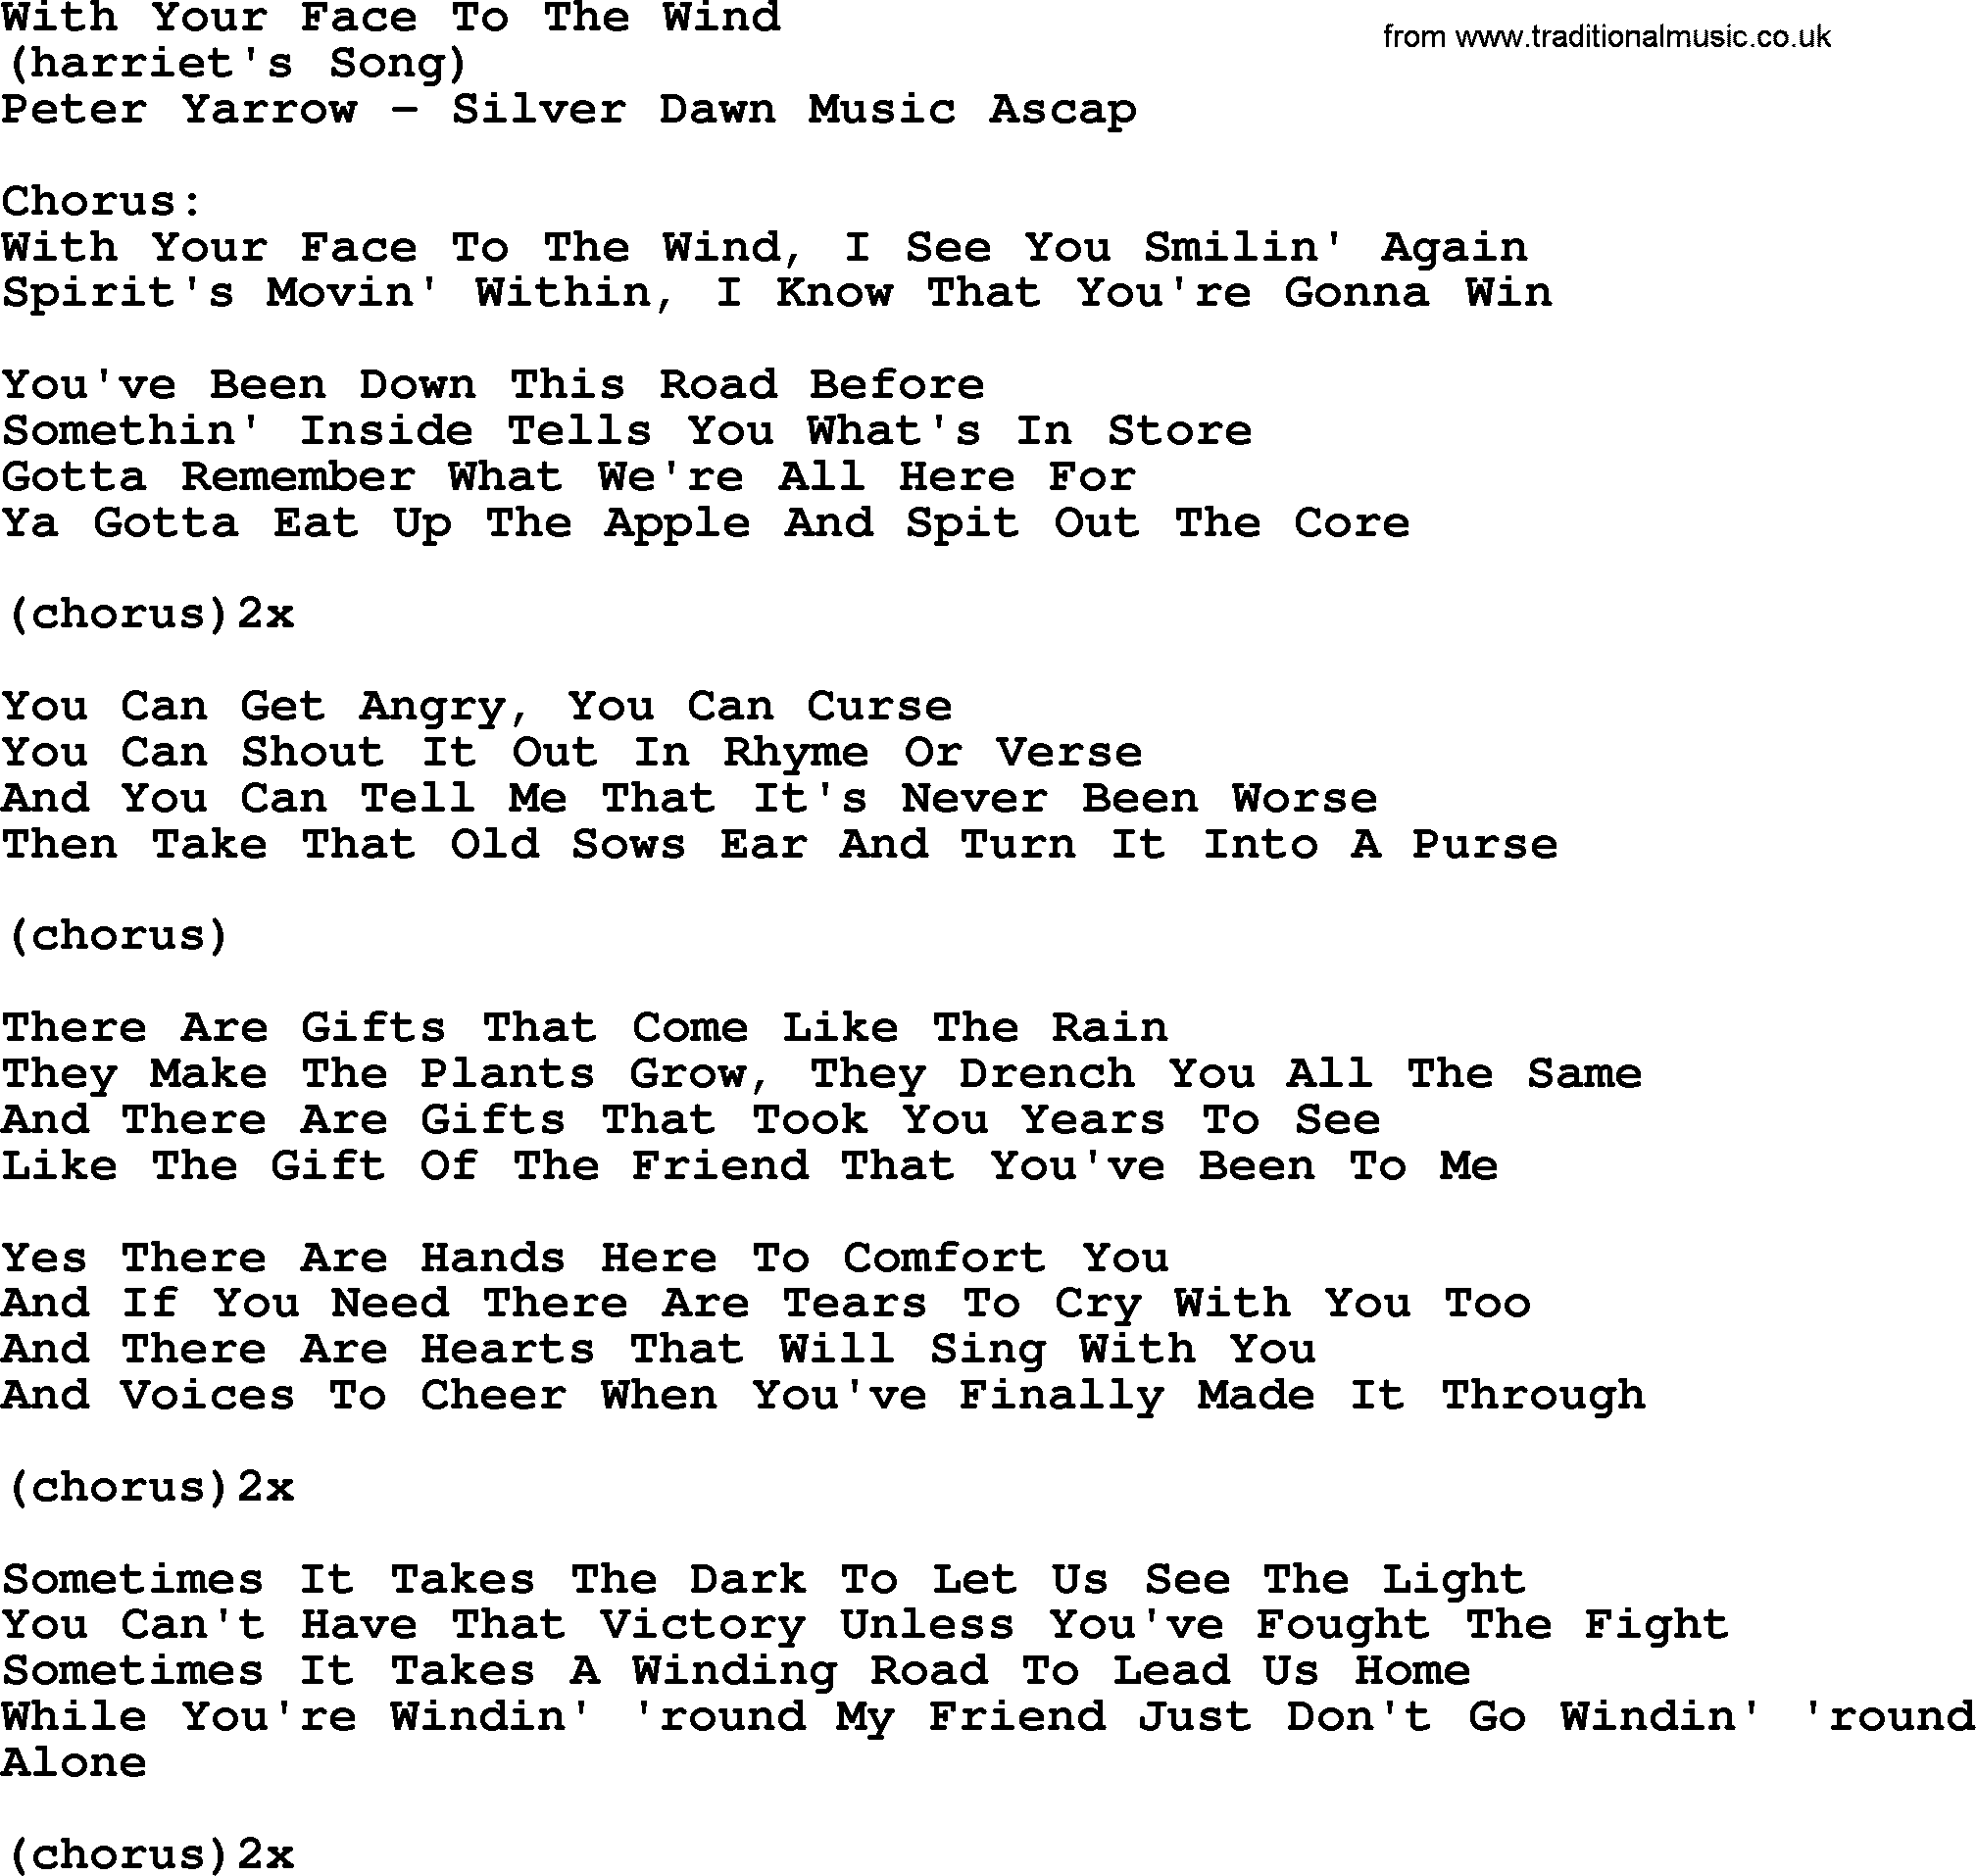 Peter, Paul and Mary song With Your Face To The Wind, lyrics and chords